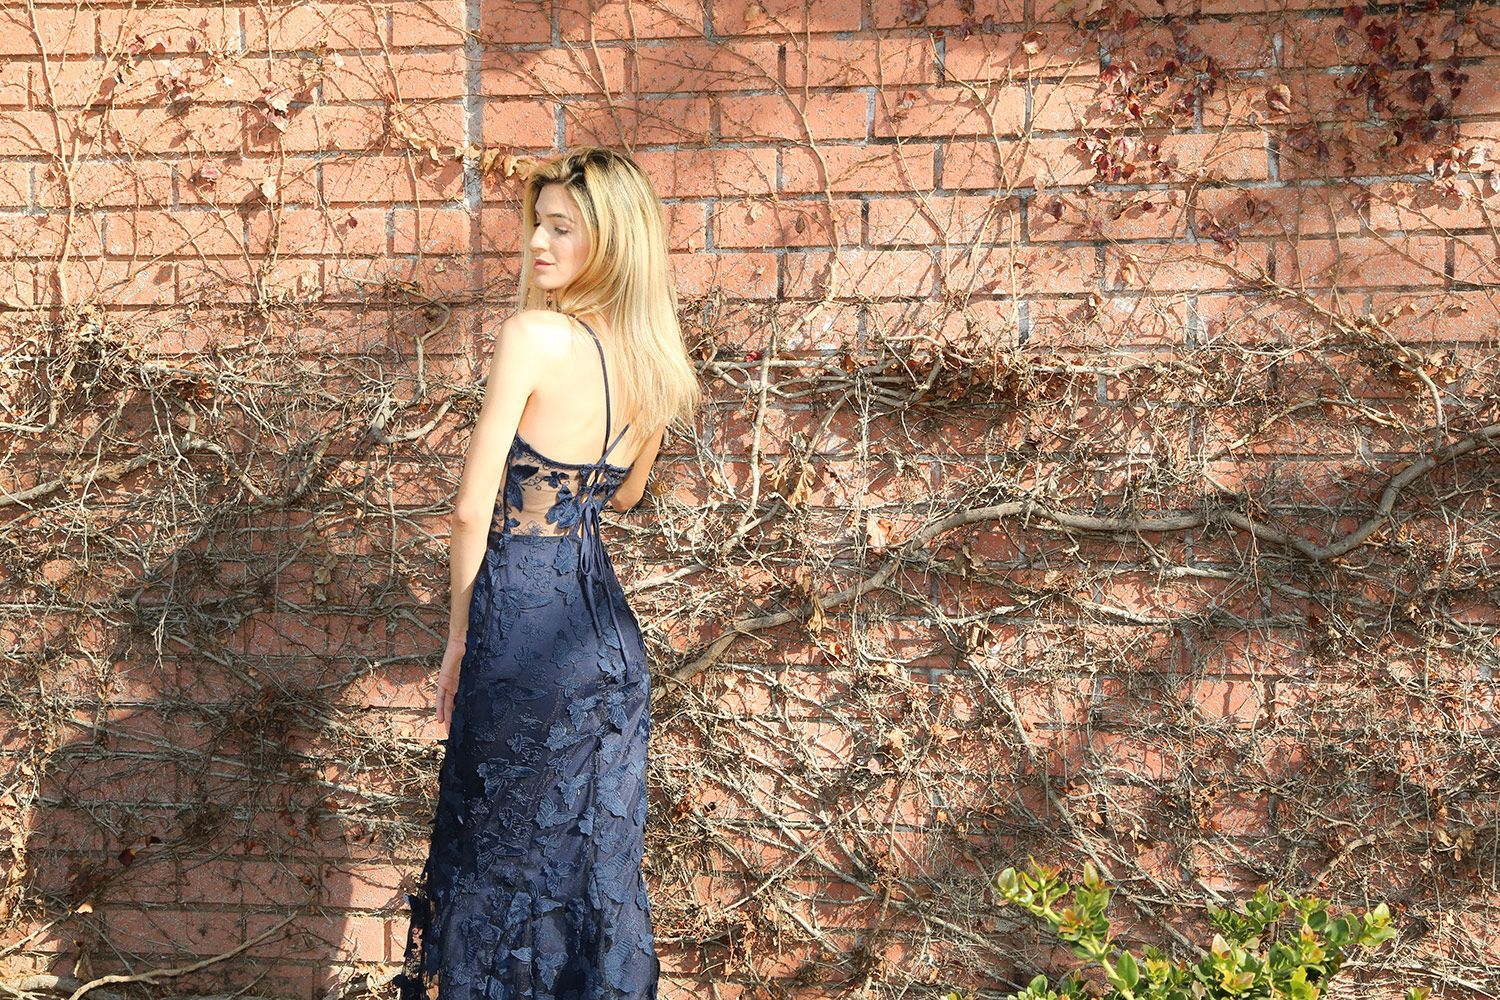 Butterfly Appliques Lace Maxi Cami Dress - BTK COLLECTION